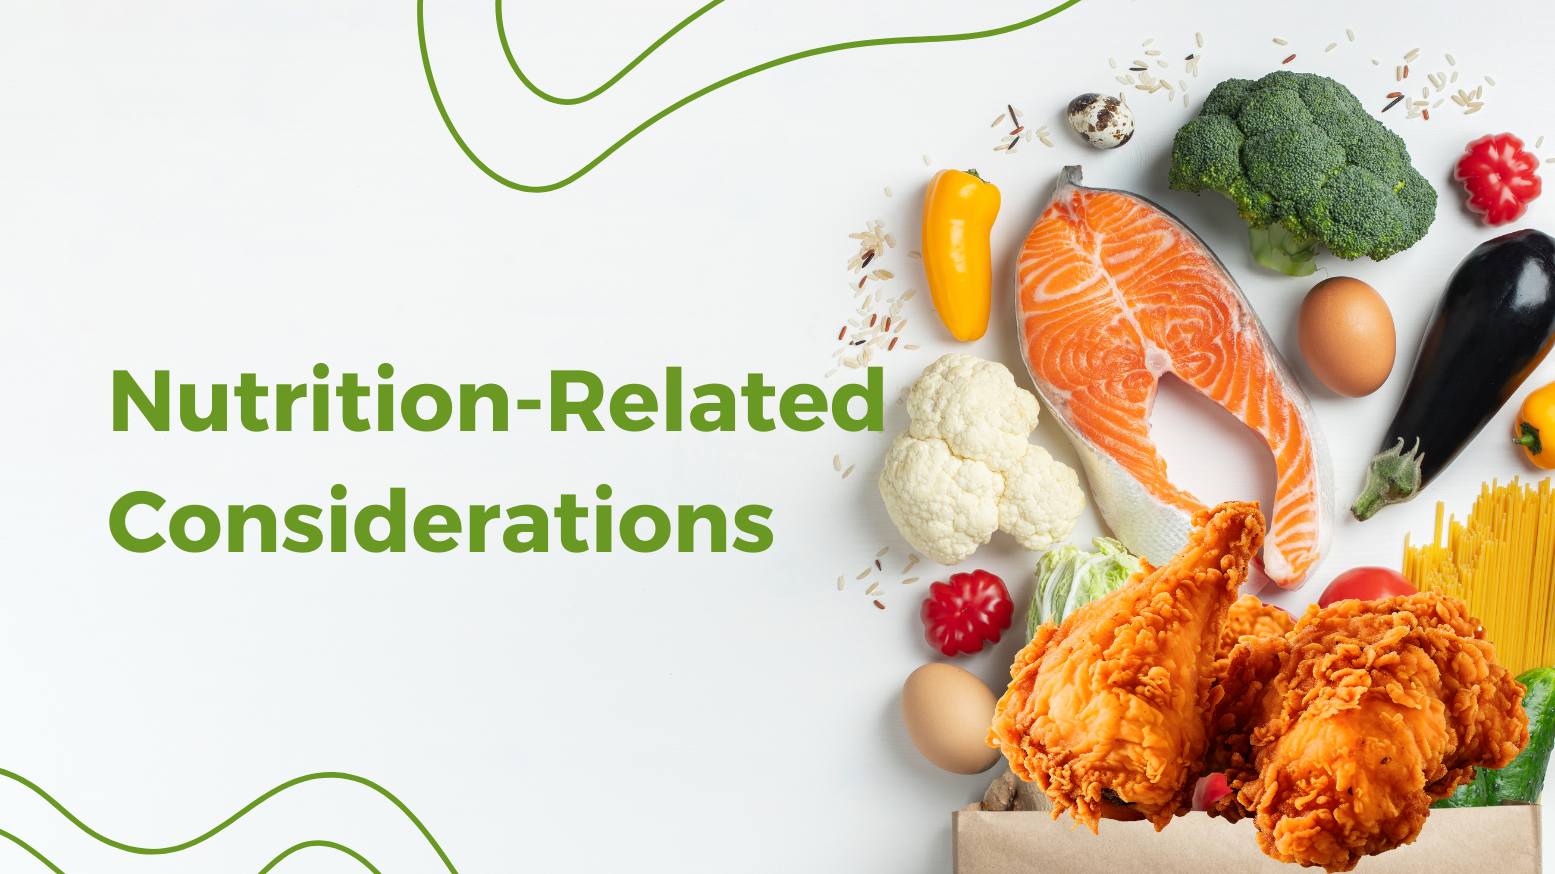 Nutrition-Related Considerations